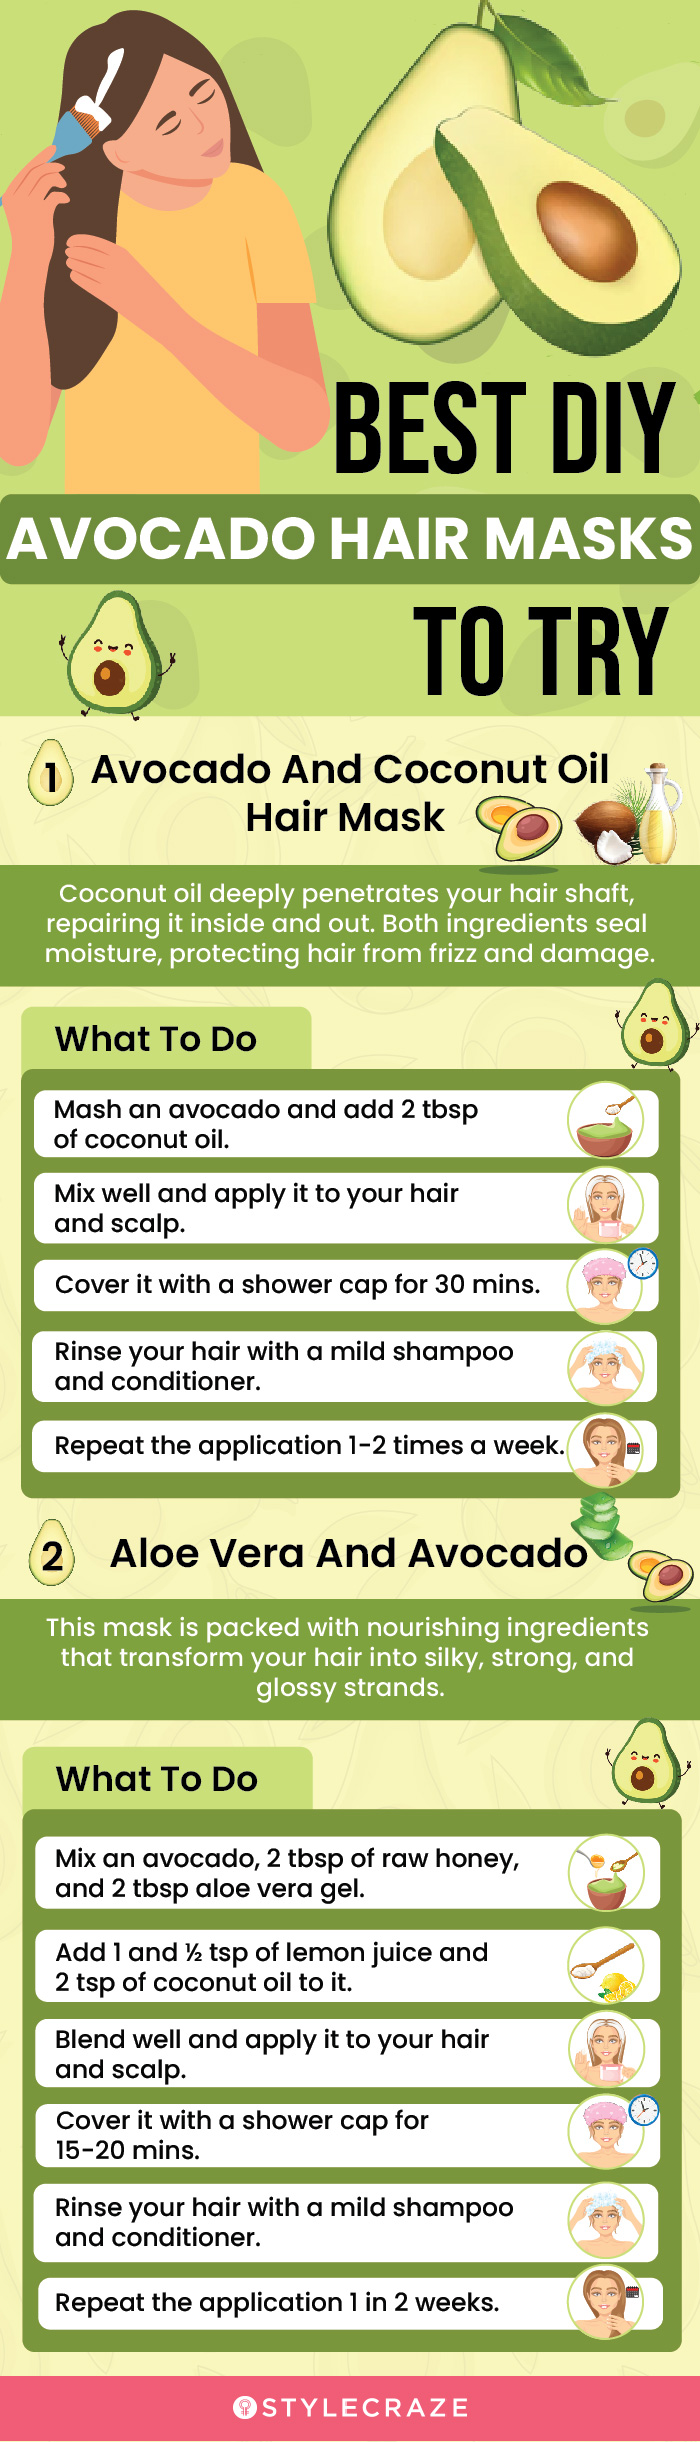 best diy avocado hair masks to try (infographic)